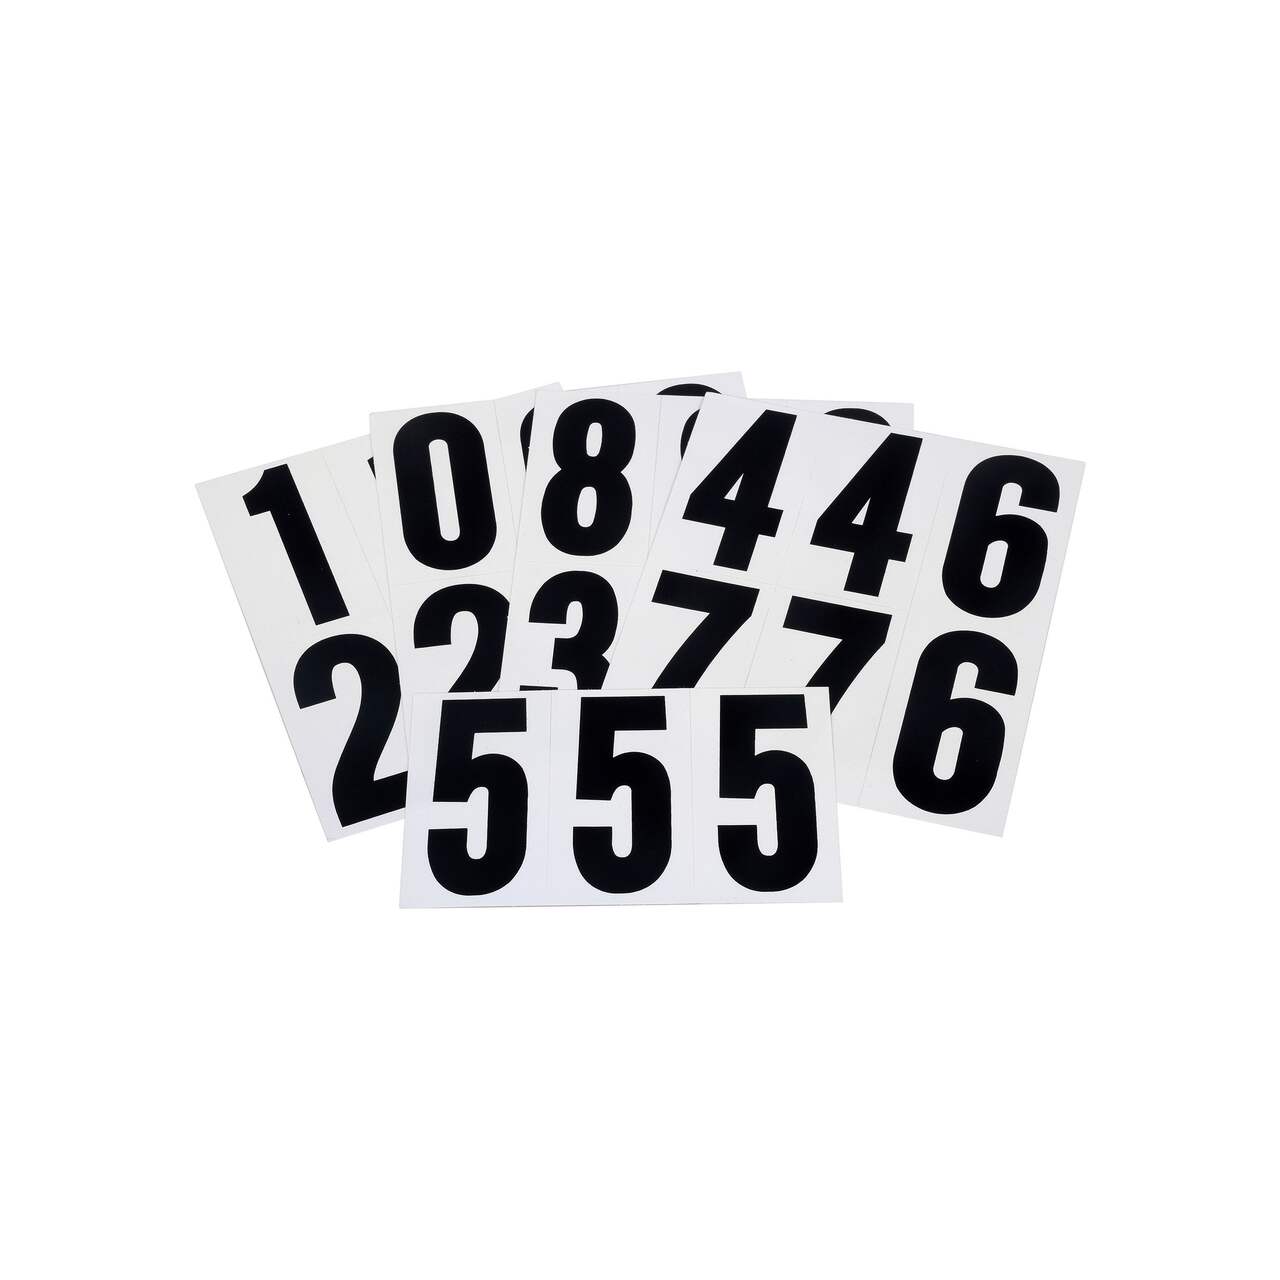 Self 0-9 Numbers Numbers Sets (2/3/4inch) Strong for Houses Number Reflective for Outside Stickers 5 Adhesive Mailbox Address Stickers Light for Phone